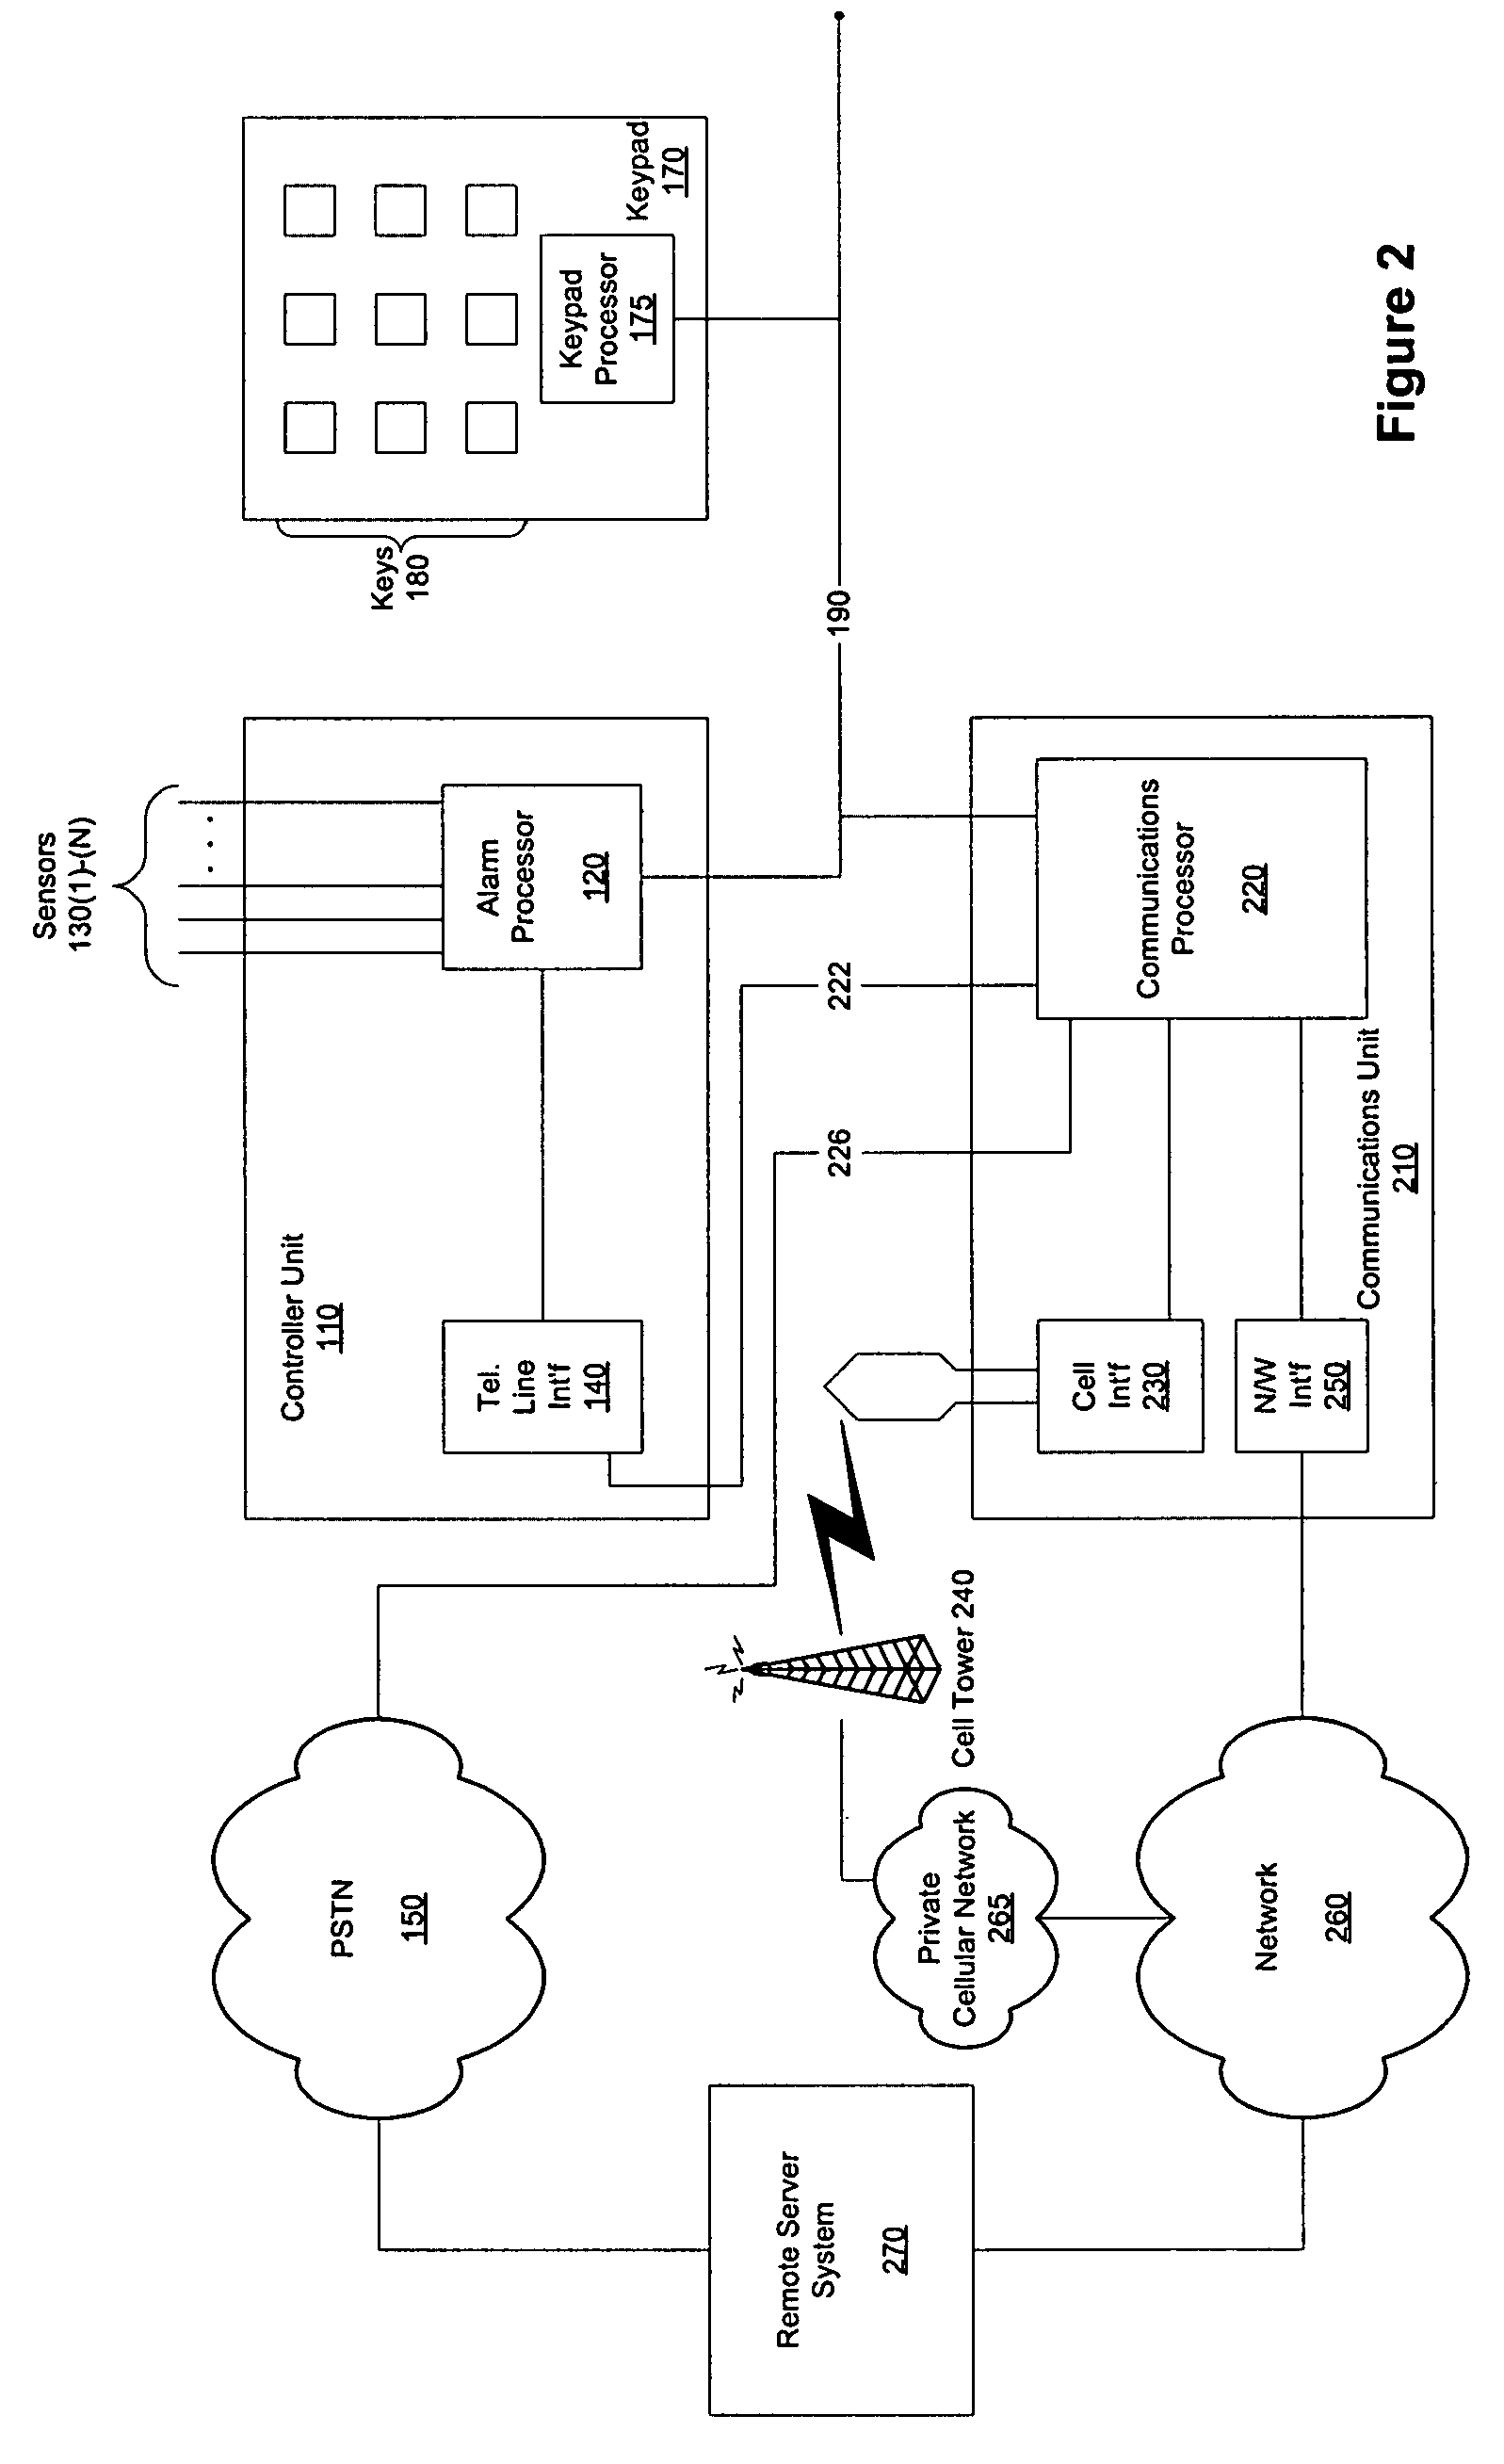 Method and system for coupling an alarm system to an external network